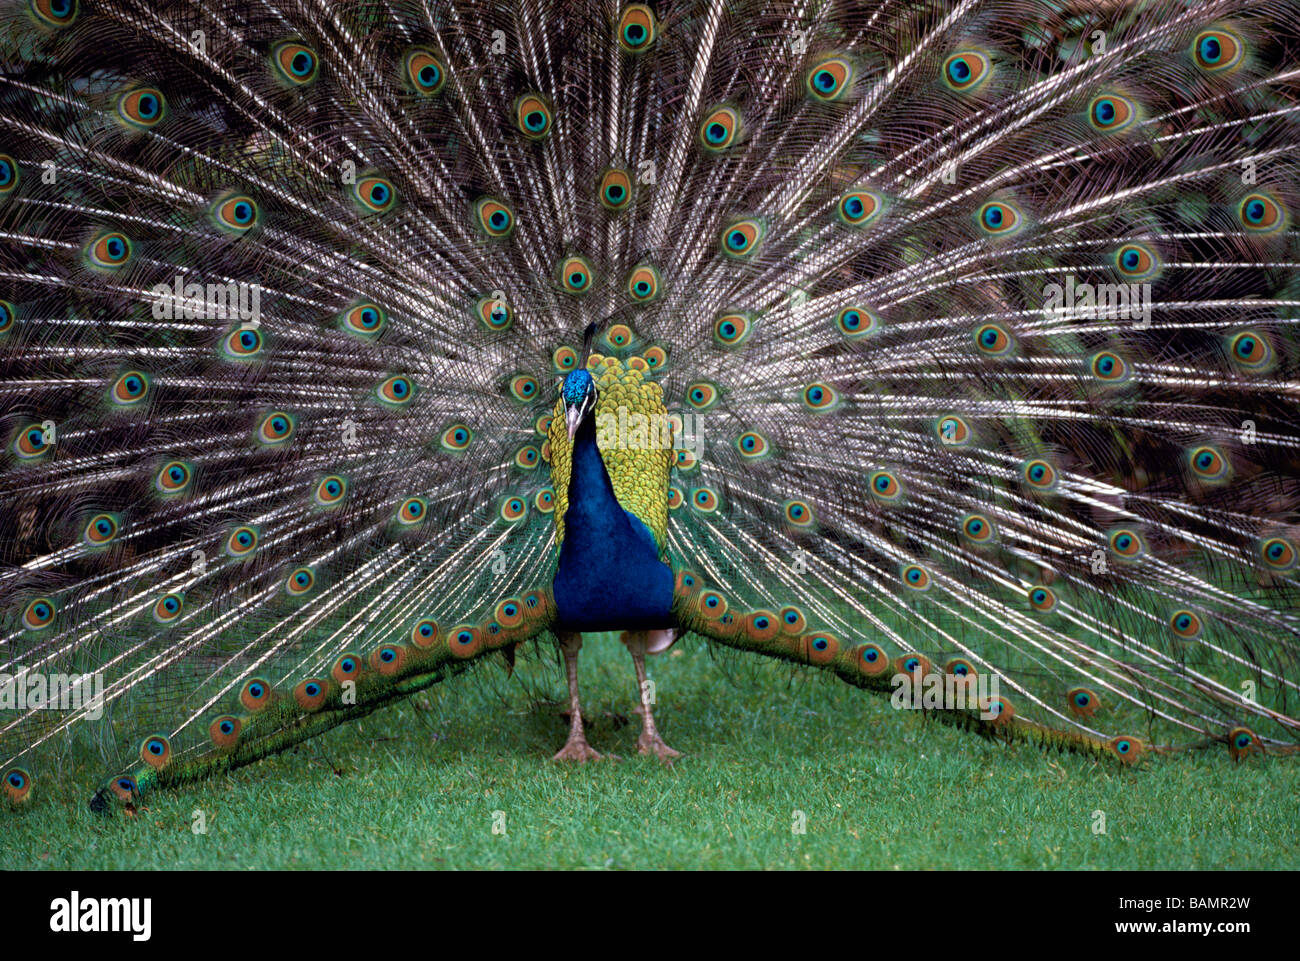 Indian Blue Male Peacock (Pavo cristatus) performing Mating Ritual with Tail Feathers in Courtship Display Stock Photo